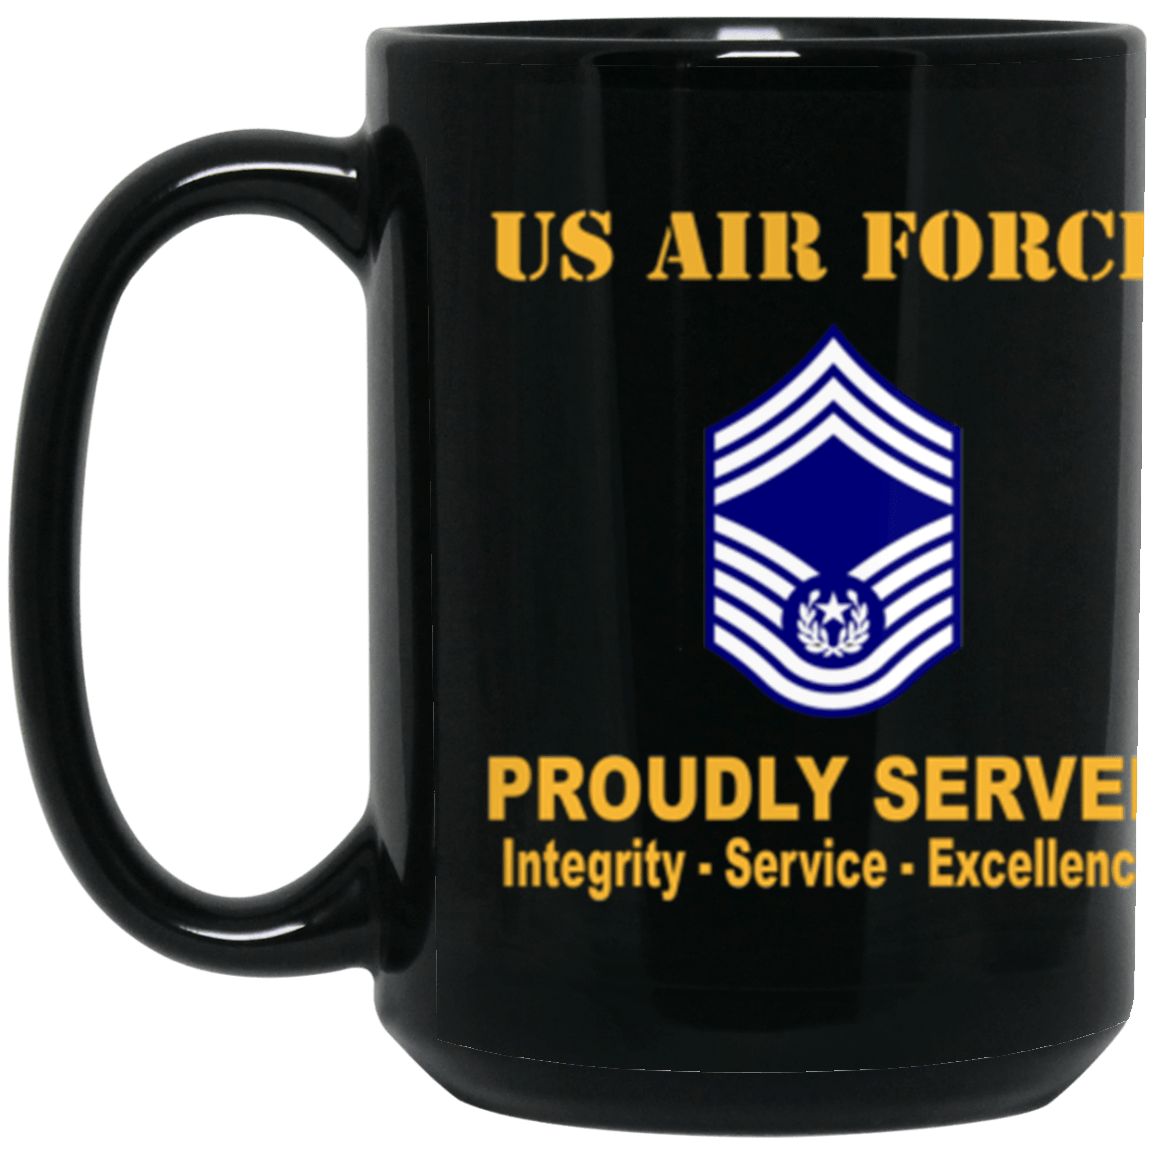 US Air Force E-9 Chief Master Sergeant Of The Air Force E9 CMSAF Noncommissioned Officer (Special) AF Ranks Proudly Served Core Values 15 oz. Black Mug-Drinkware-Veterans Nation